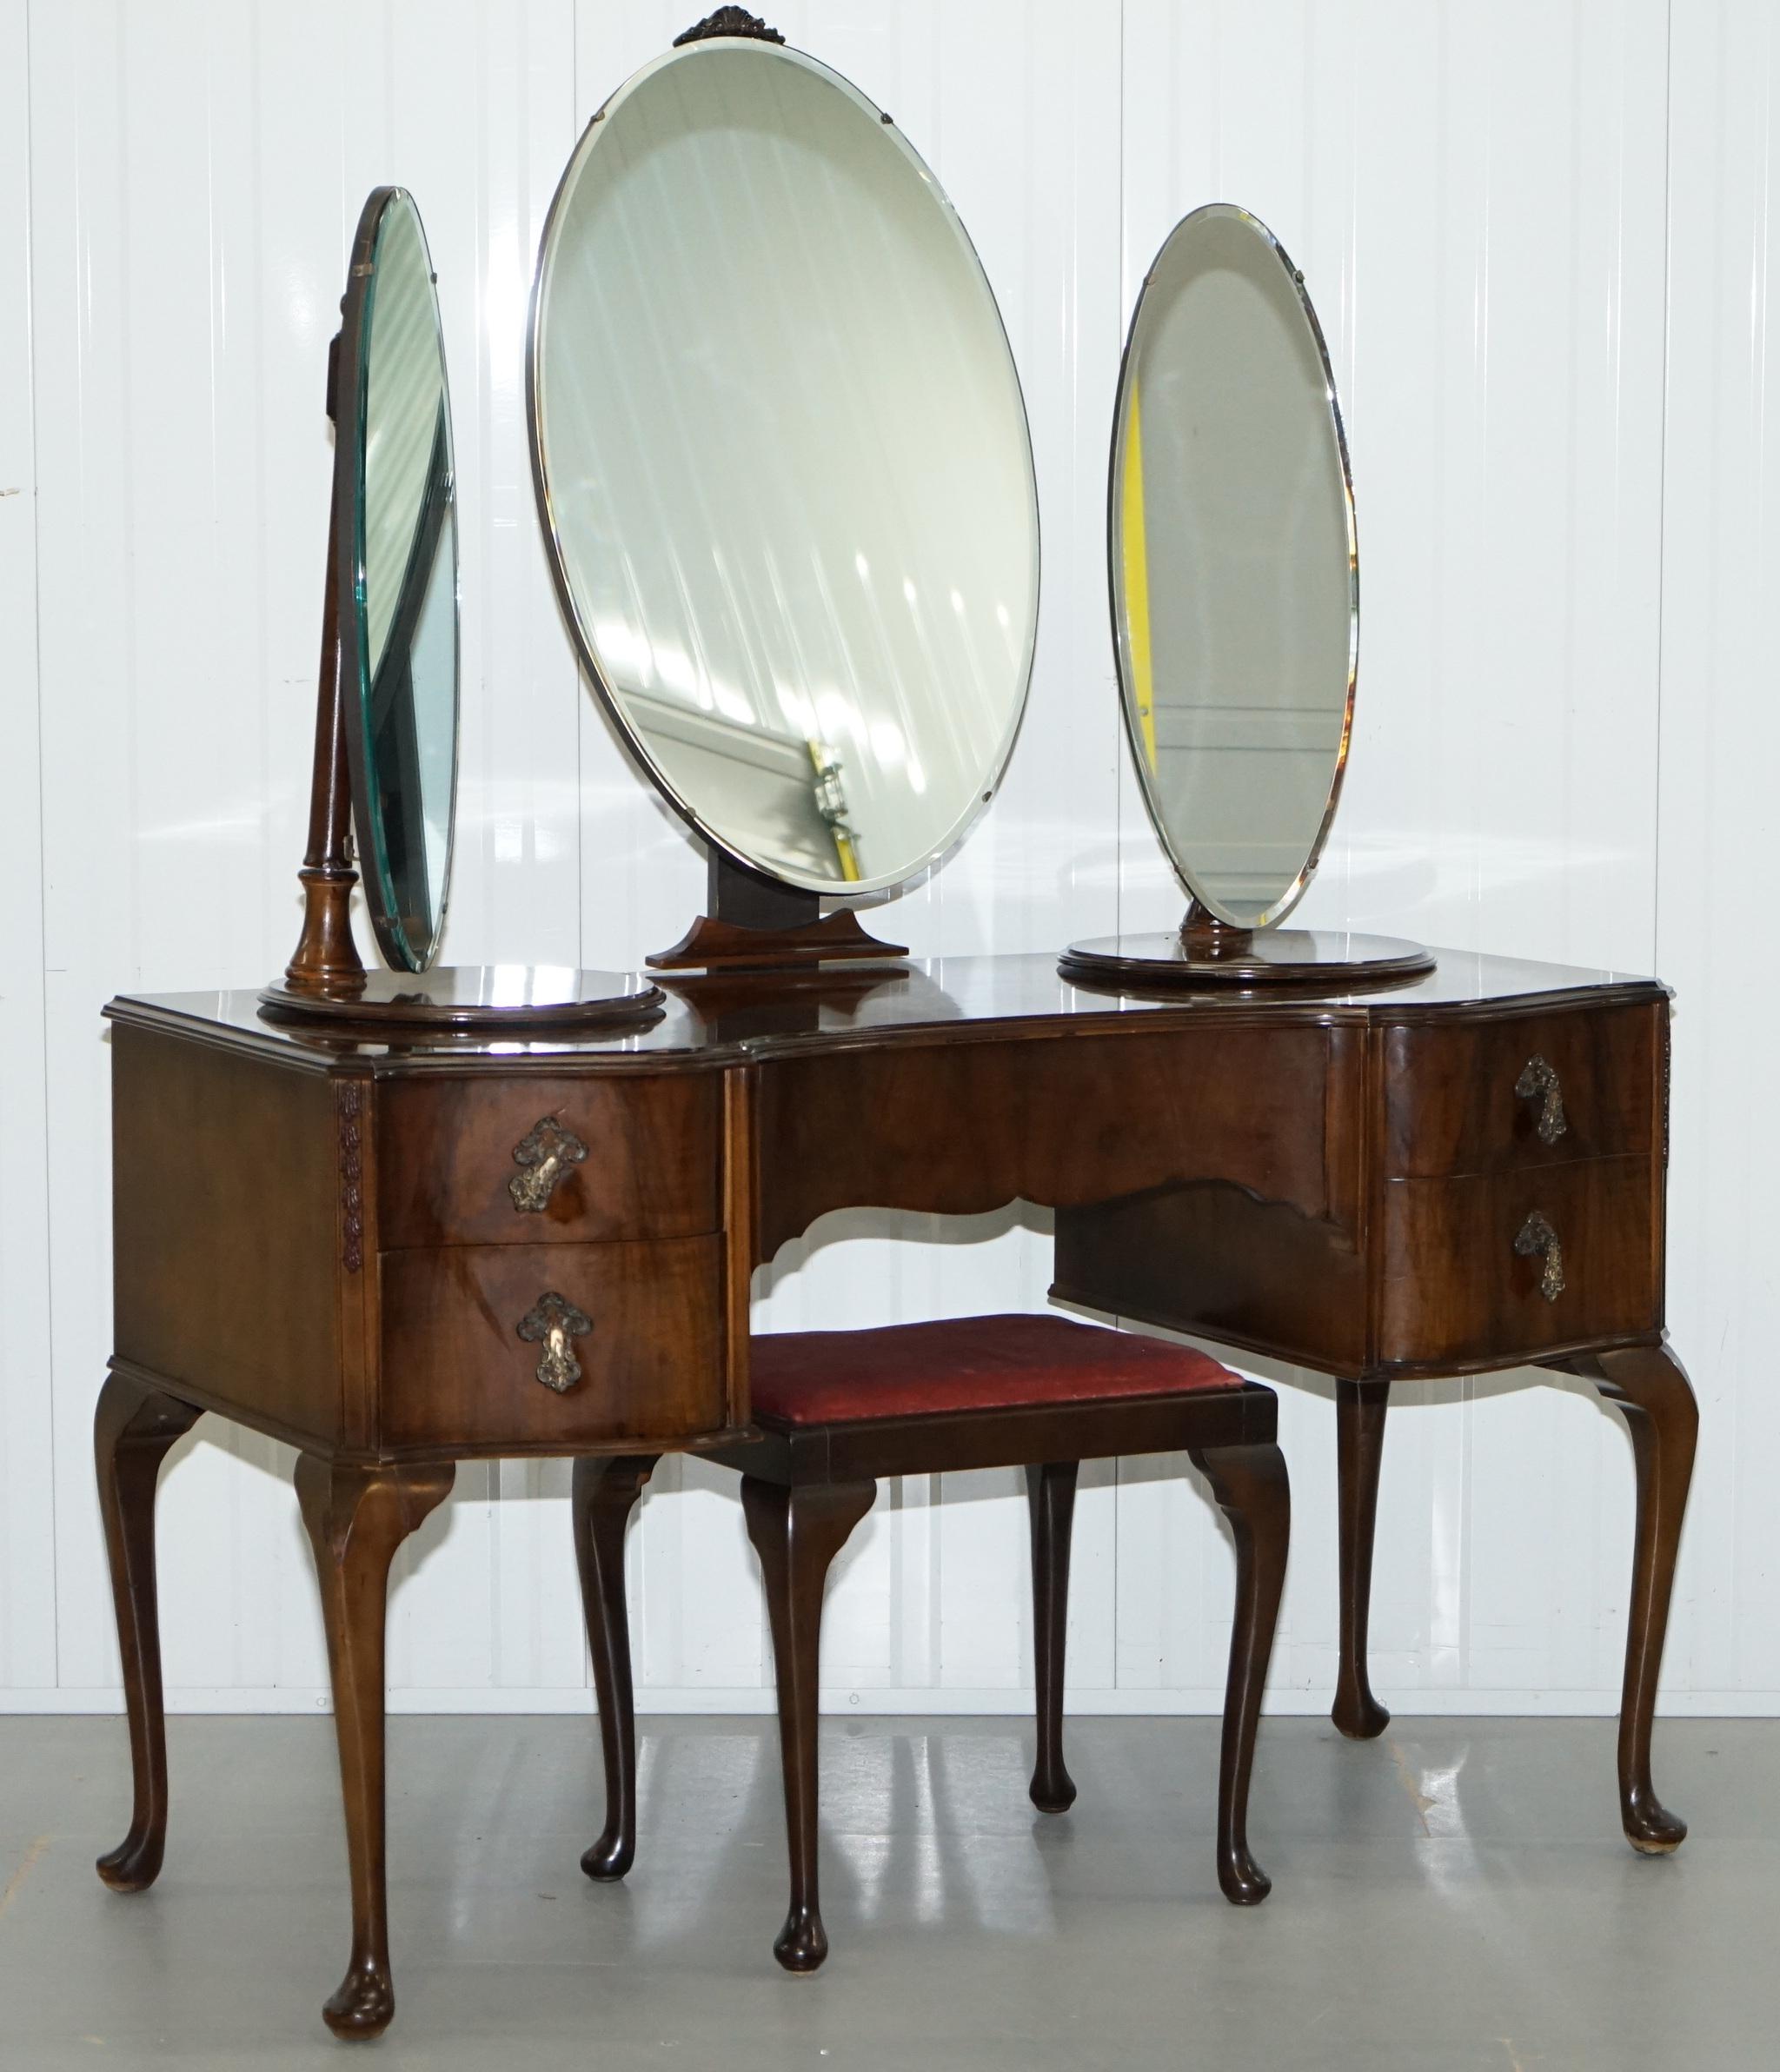 We are delighted to offer for sale this lovely handmade solid Mahogany Edwardian Dressing table with swivel side mirrors and stool made

A very good looking and well-made piece, I've never seen these free standing swivel side mirrors before, they